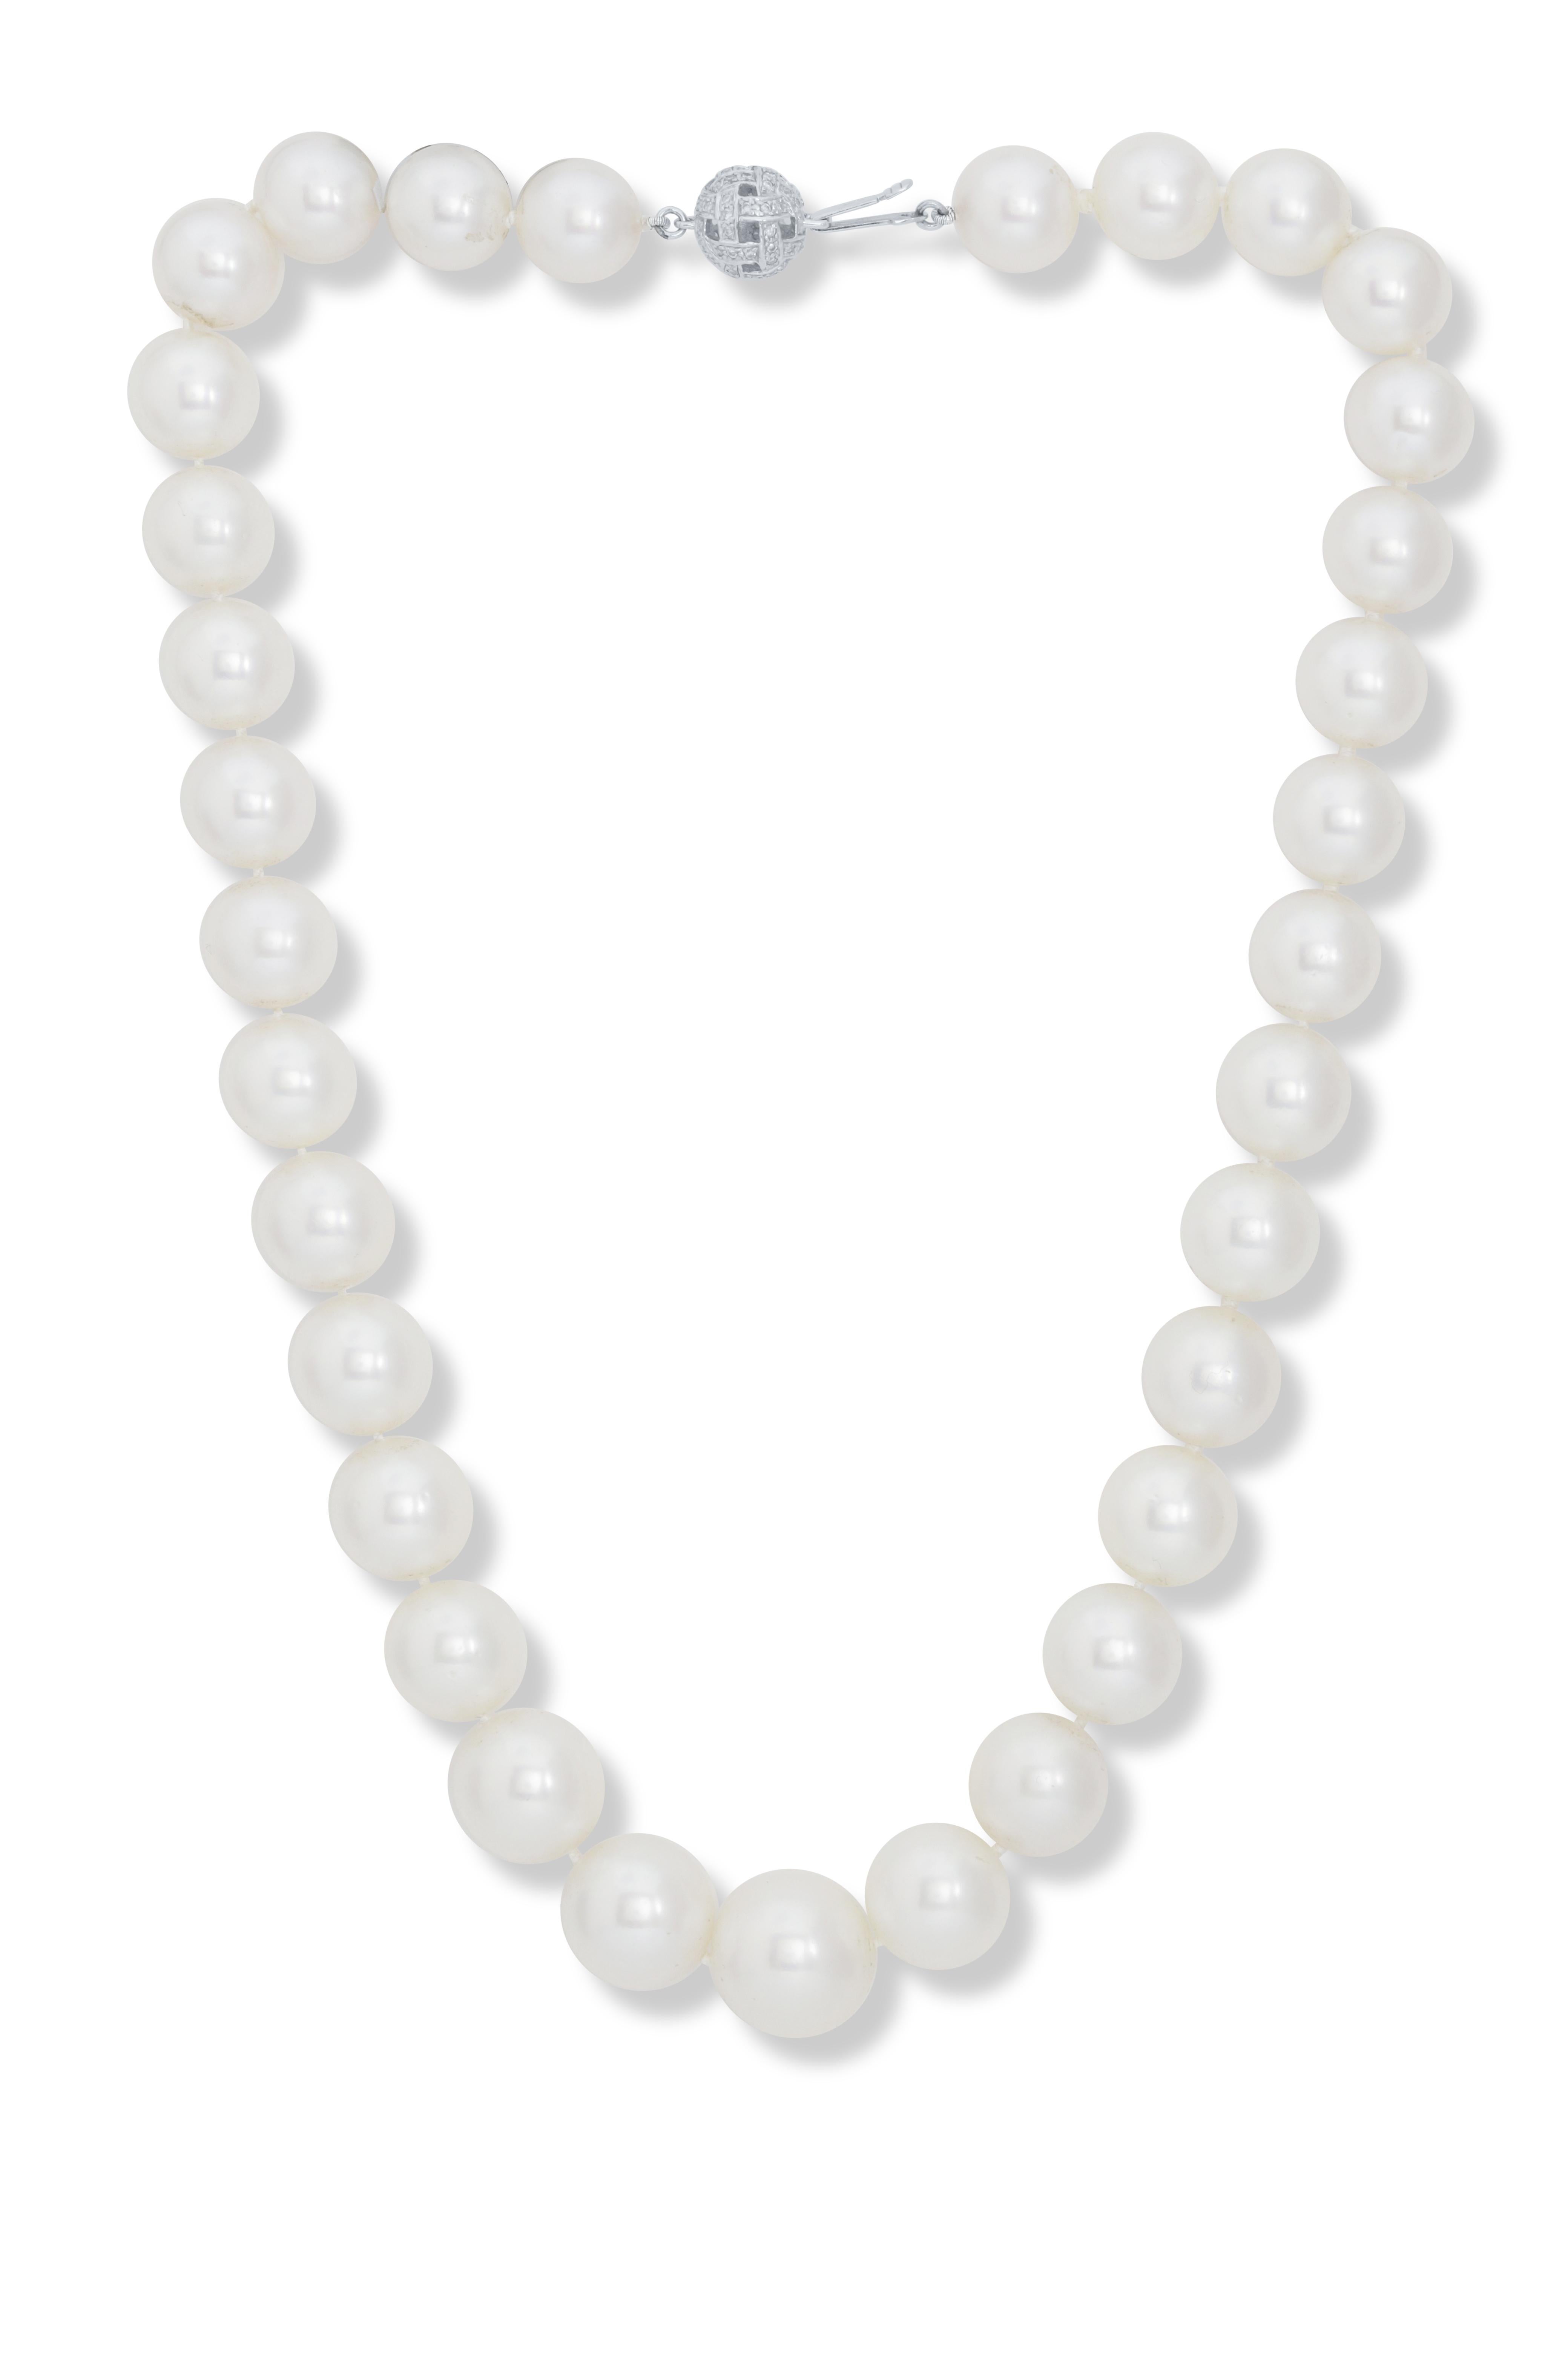 18kt white gold pearl necklace adorned with 11-15 mm tahitian south sea white pearls fine pinkish/white  and a clip containing 0.40 cts tw micropave round diamonds
Diana M. is a leading supplier of top-quality fine jewelry for over 35 years.
Diana M